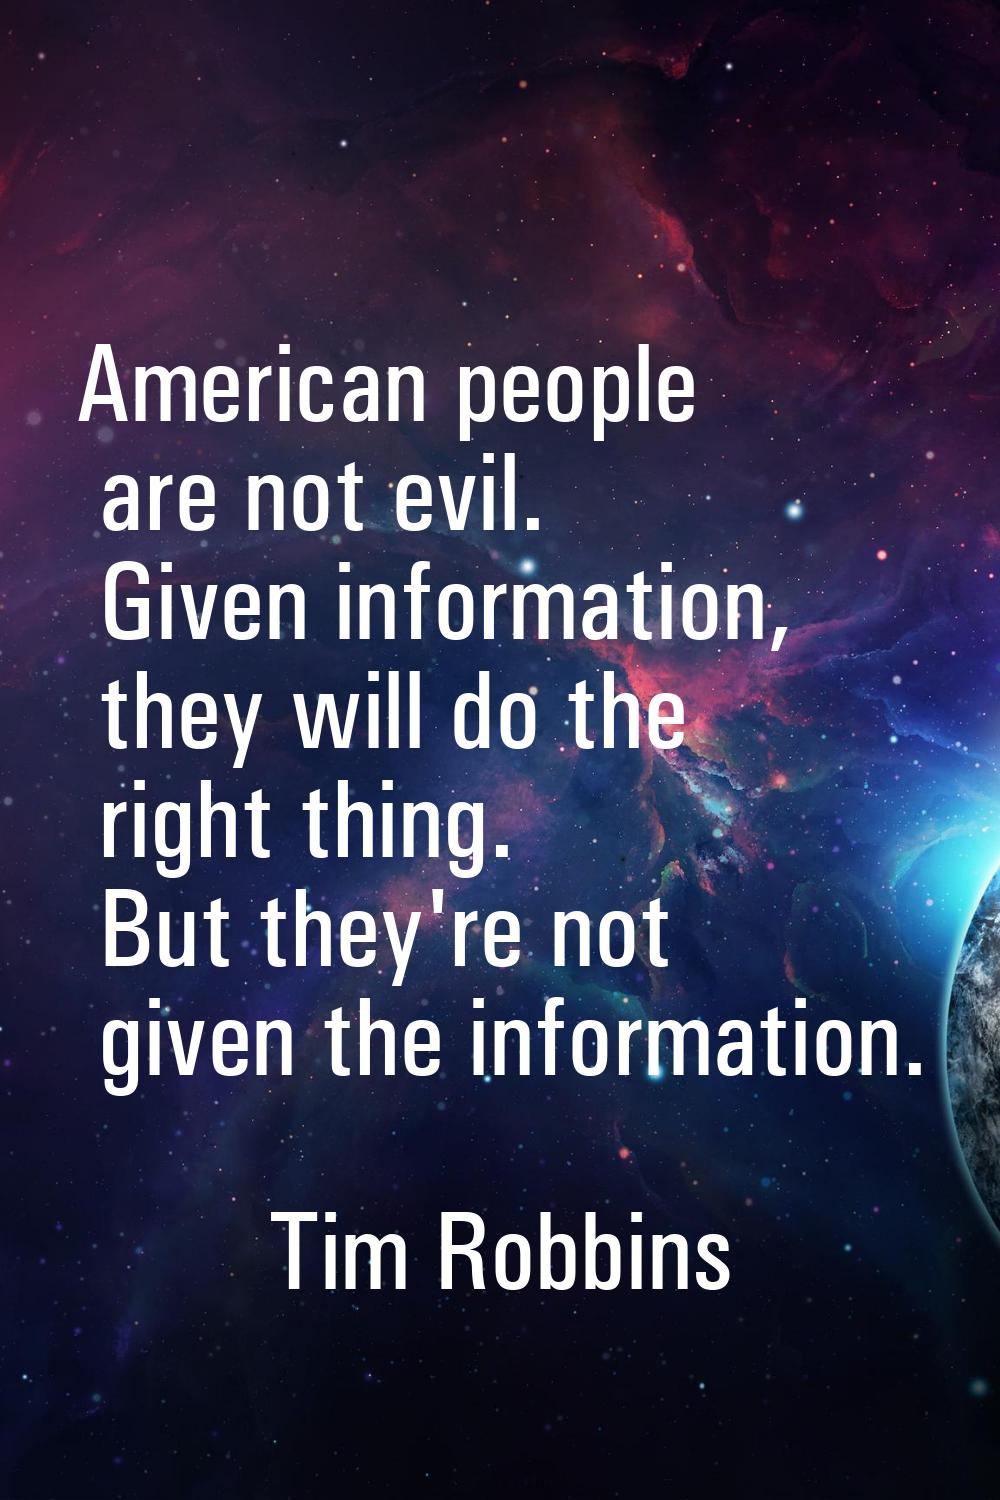 American people are not evil. Given information, they will do the right thing. But they're not give